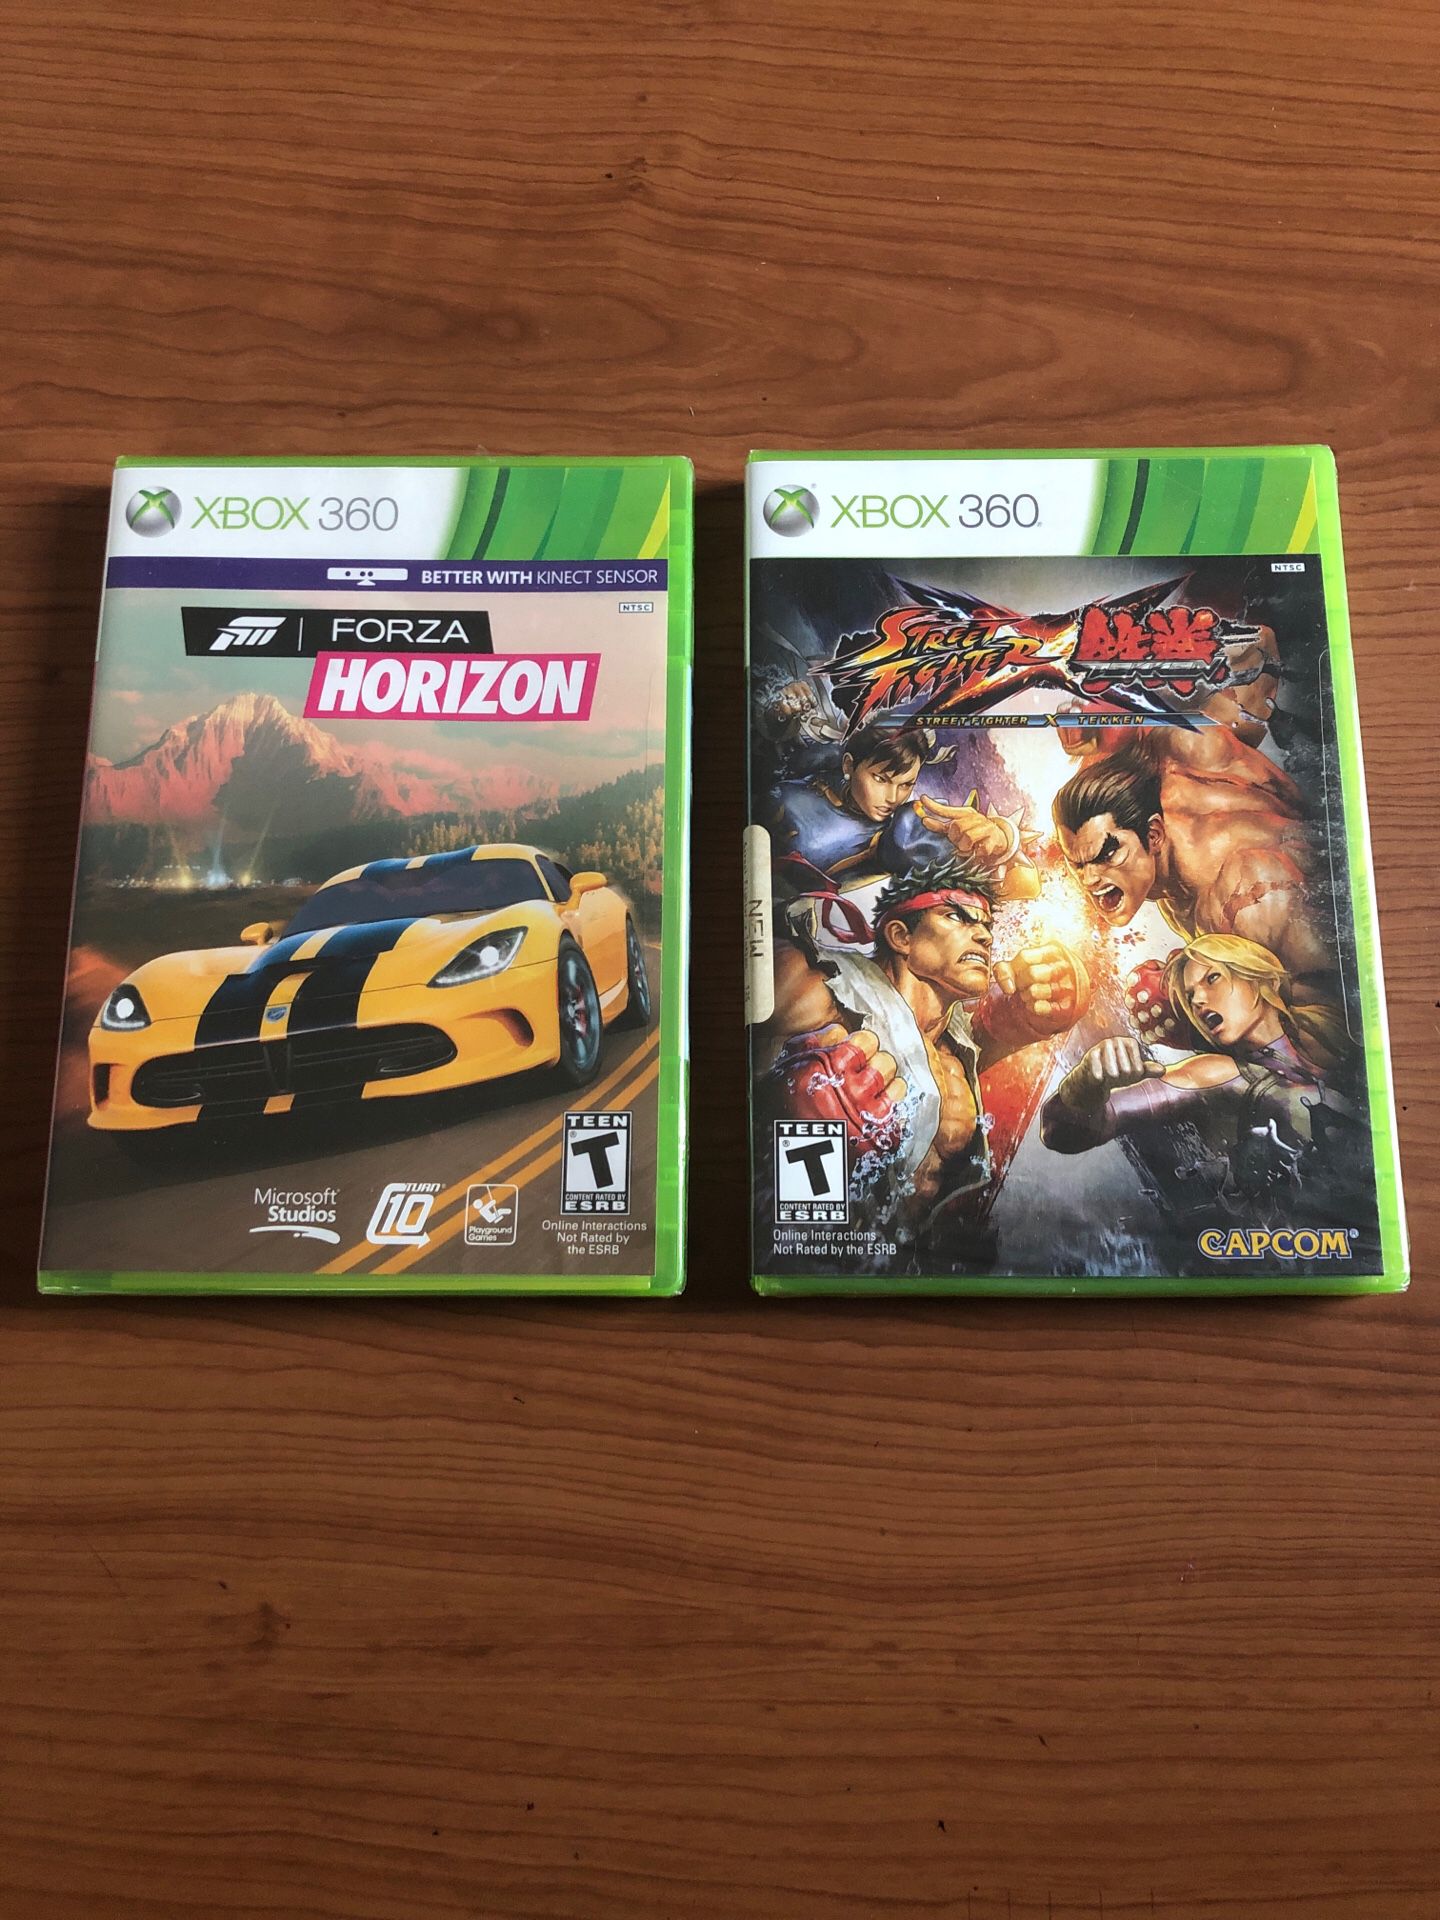 Xbox 360 new unopened games 2 for $16